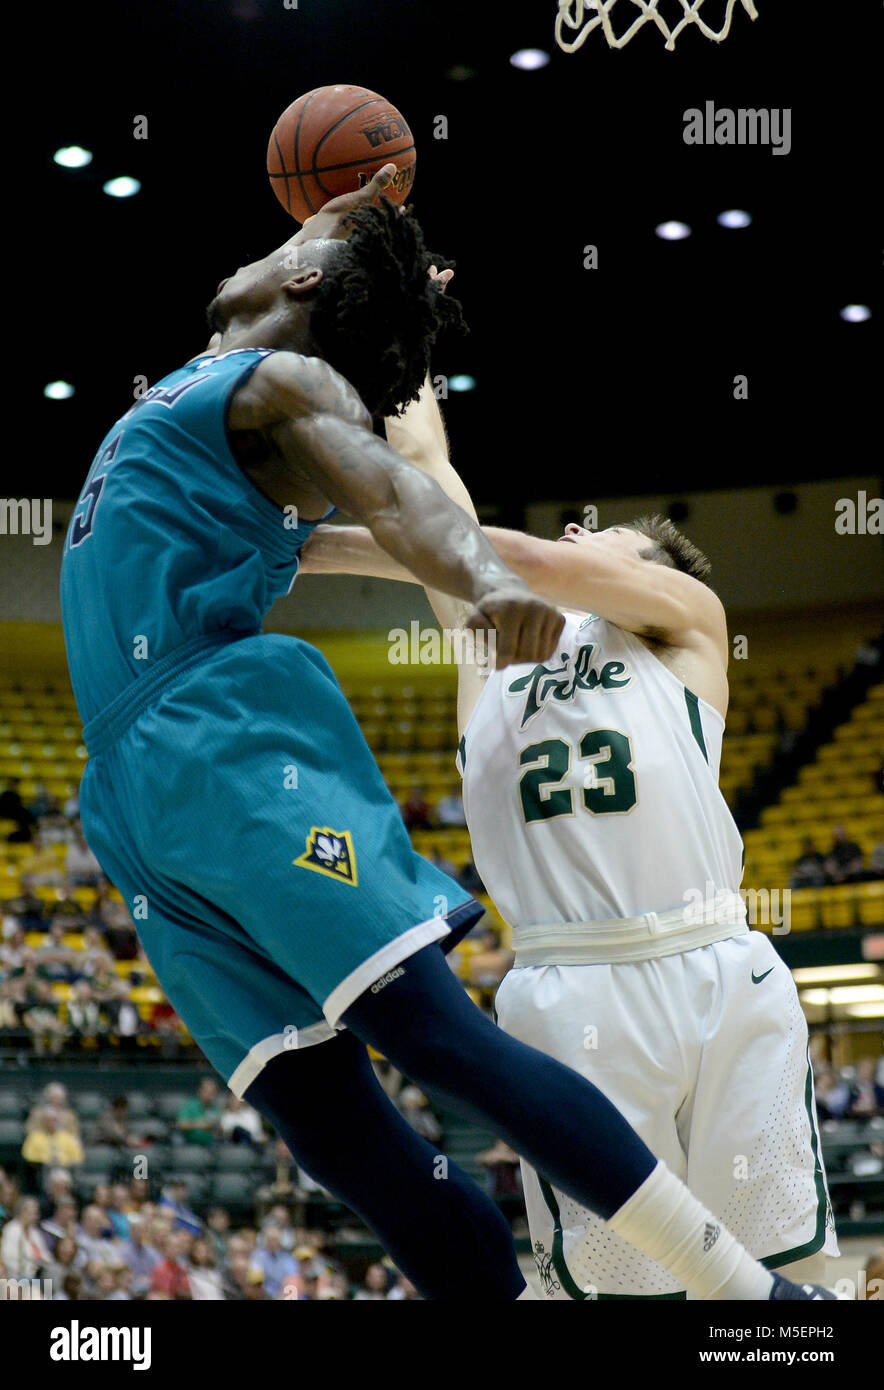 Williamsburg, VA, USA. 22nd Feb, 2018. 20180222 - UNCW forward DEVONTAE CACOK (15) and William and Mary forward JUSTIN PIERCE (23) reach for a rebound in the second half at Kaplan Arena in Williamsburg, Va. Credit: Chuck Myers/ZUMA Wire/Alamy Live News Stock Photo